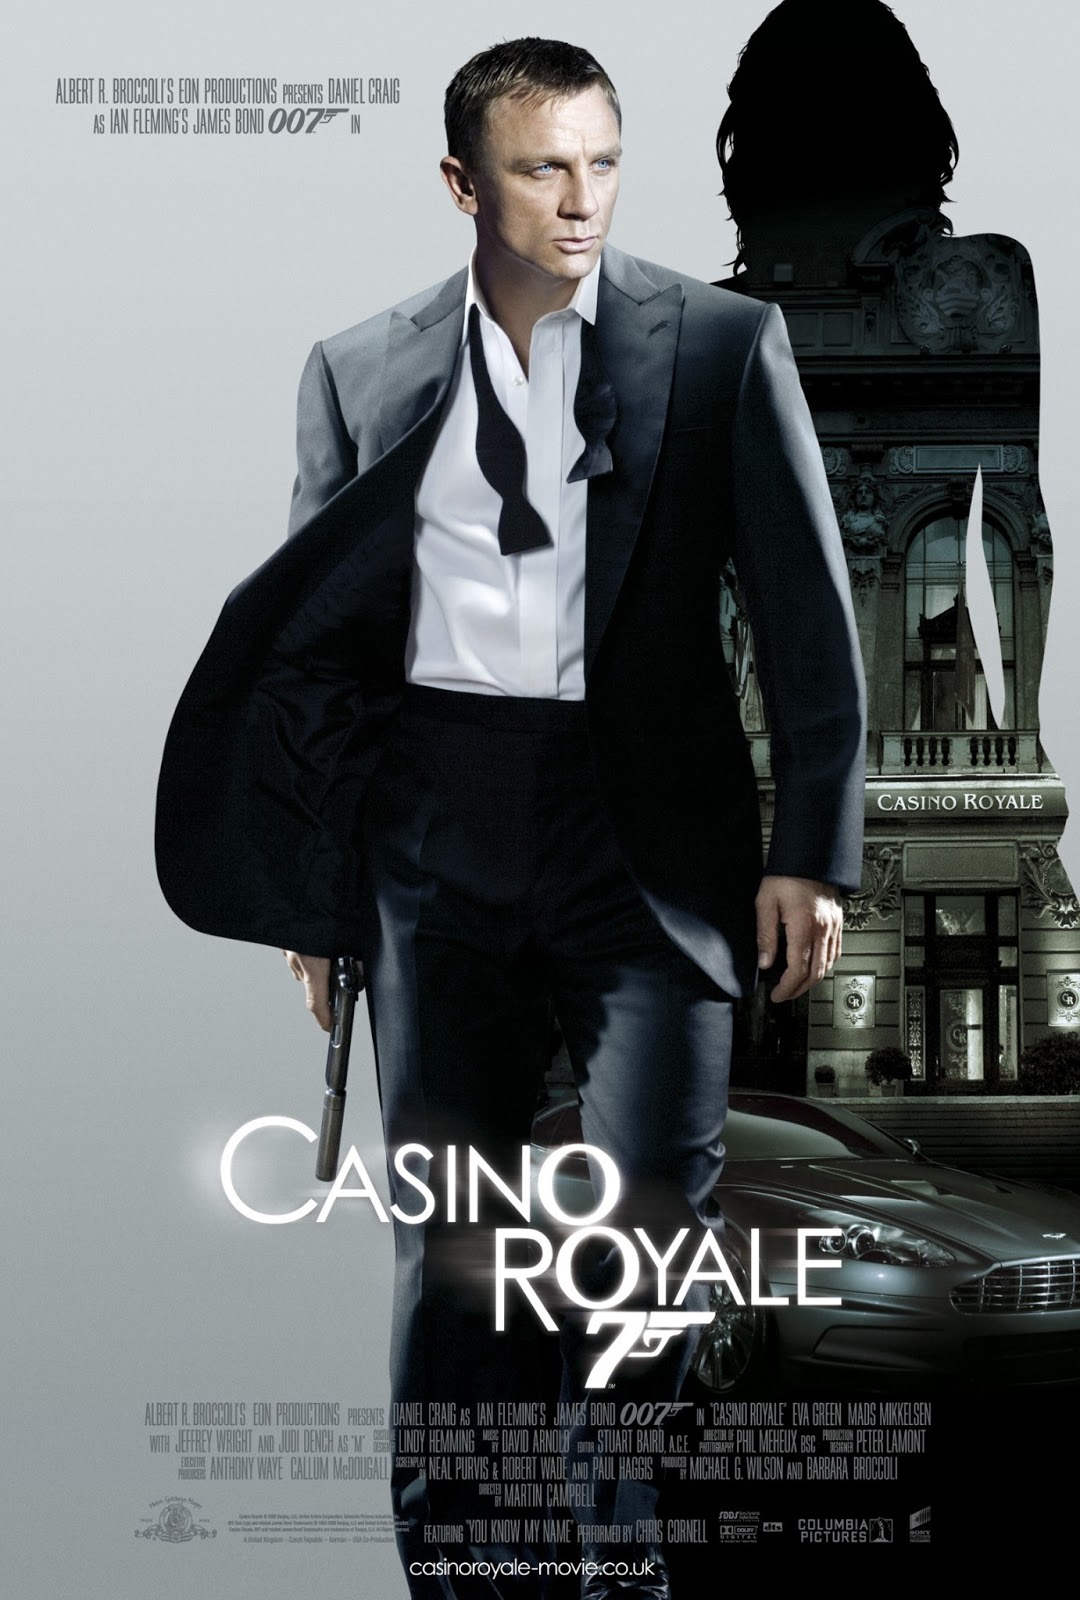 streaming services with casino royale